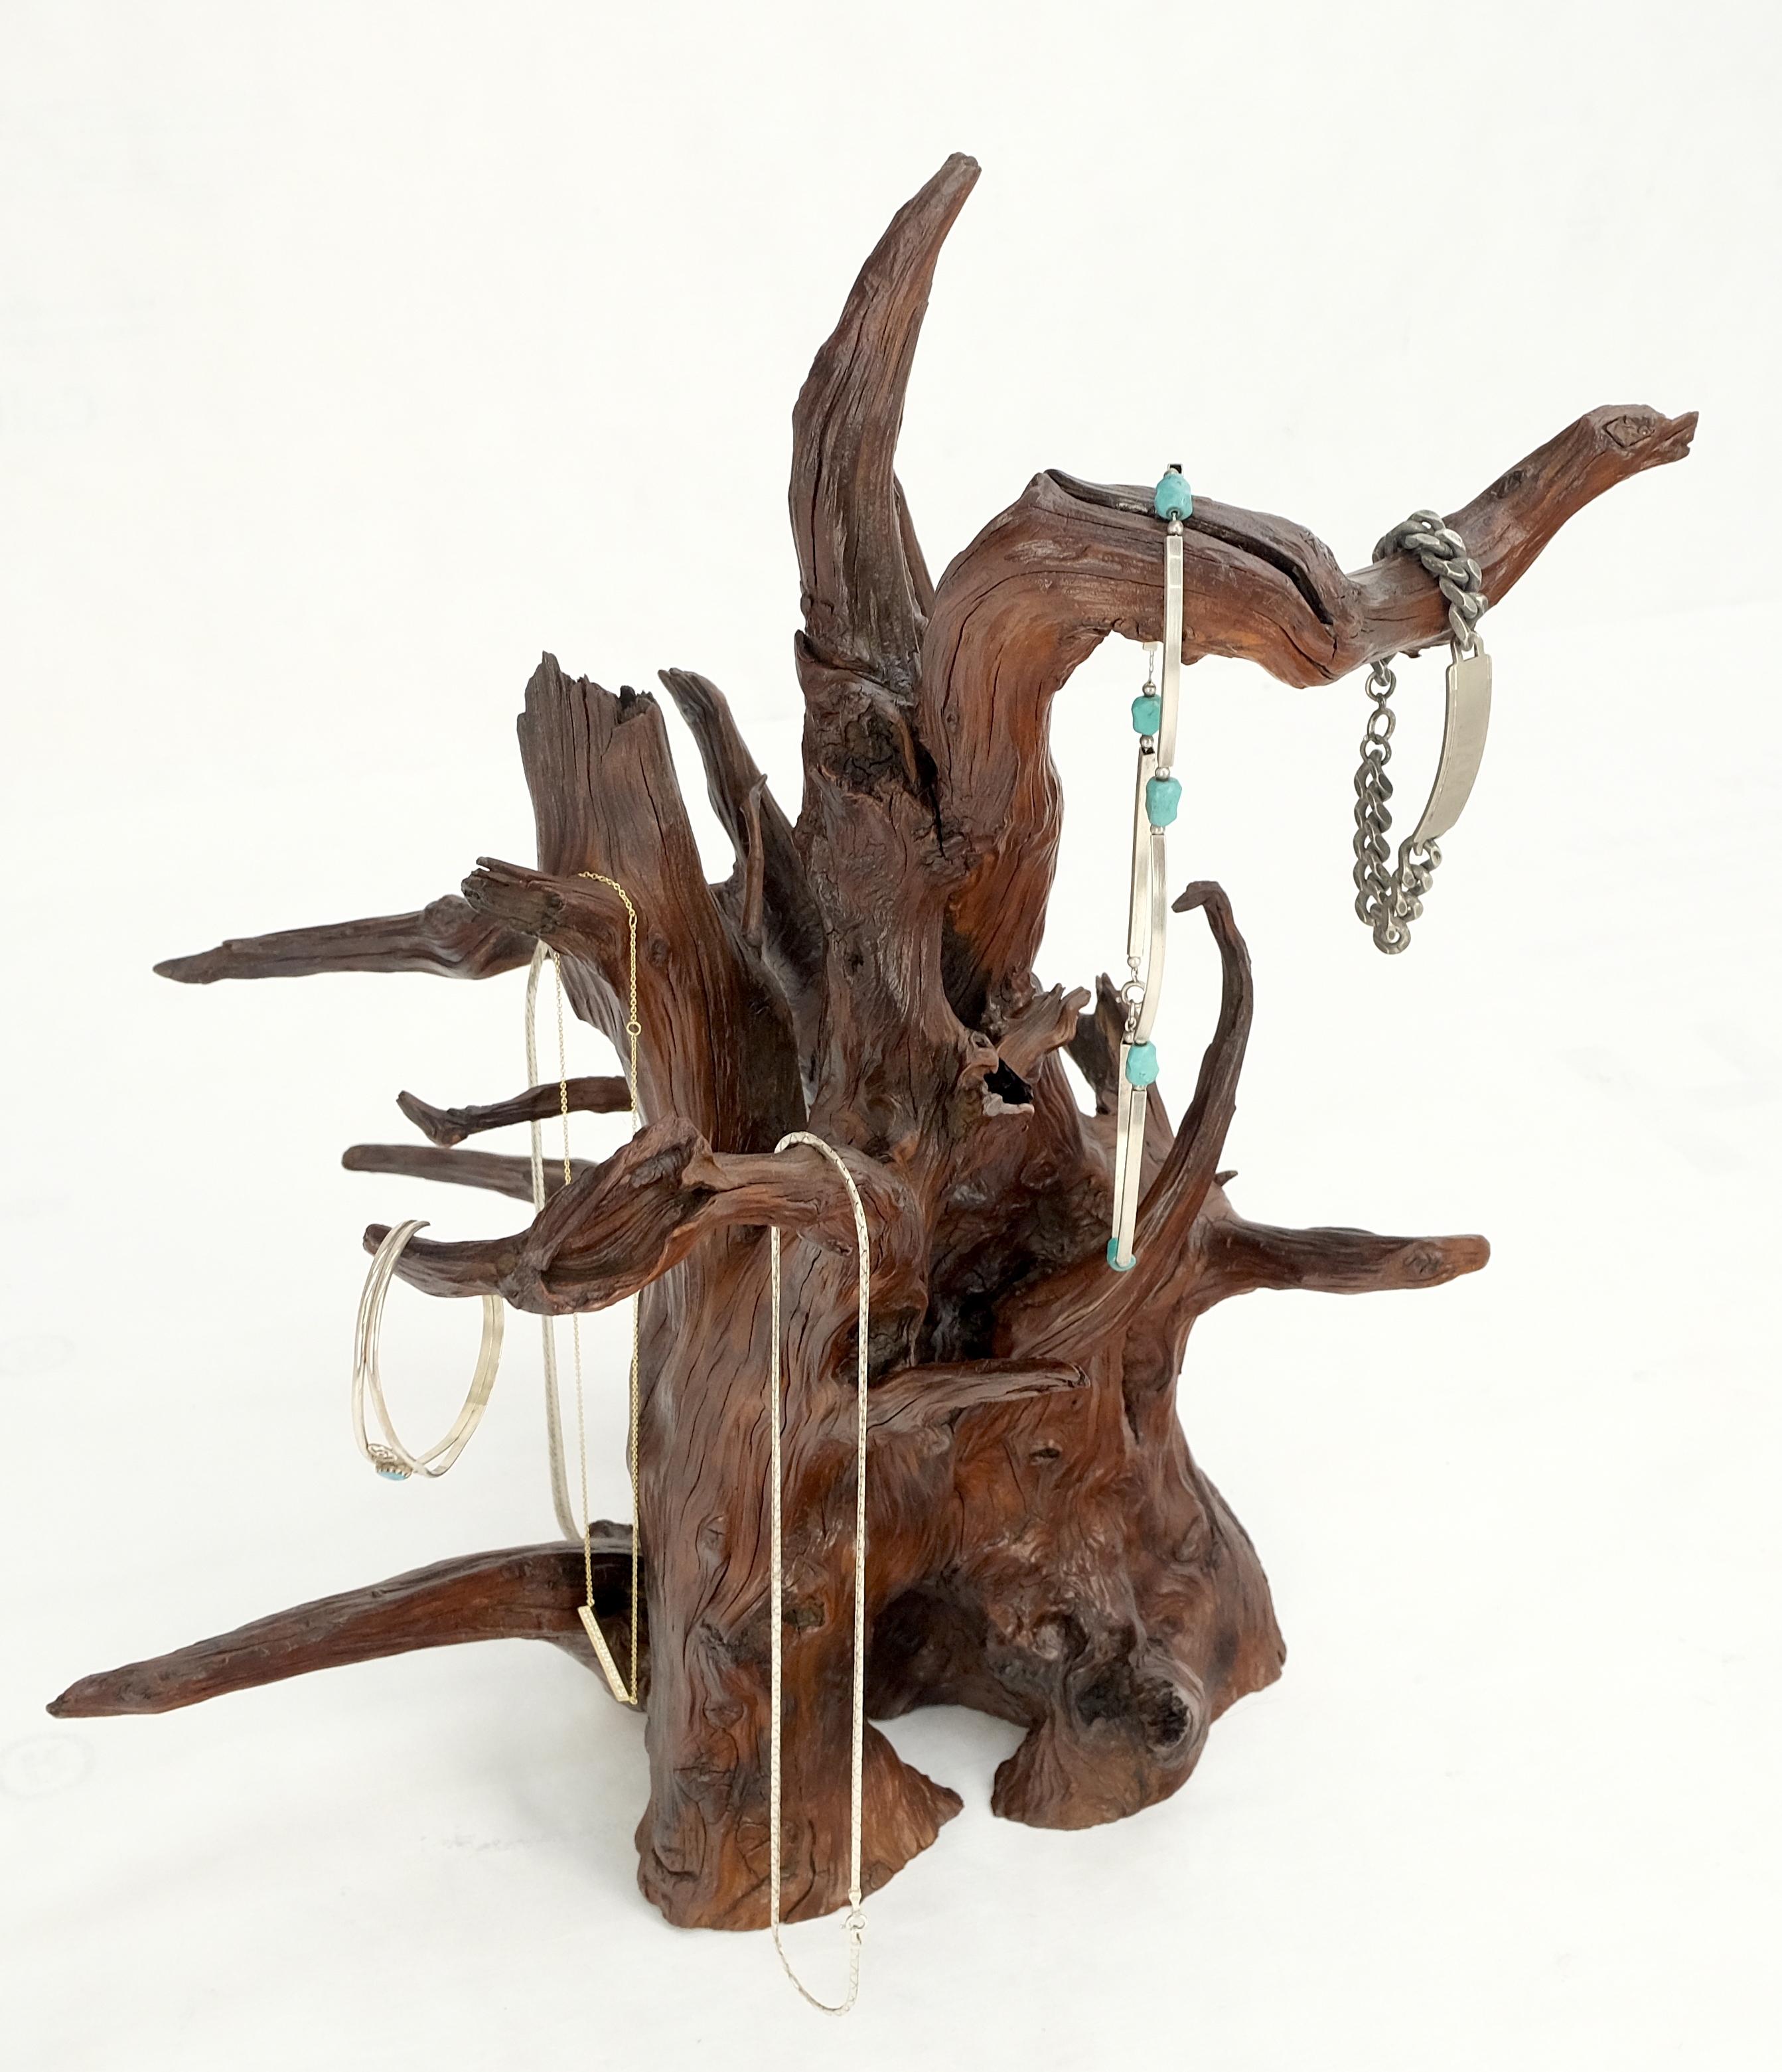 Solid driftwood root sculpture organic jewerly display nice patina & shape mint!